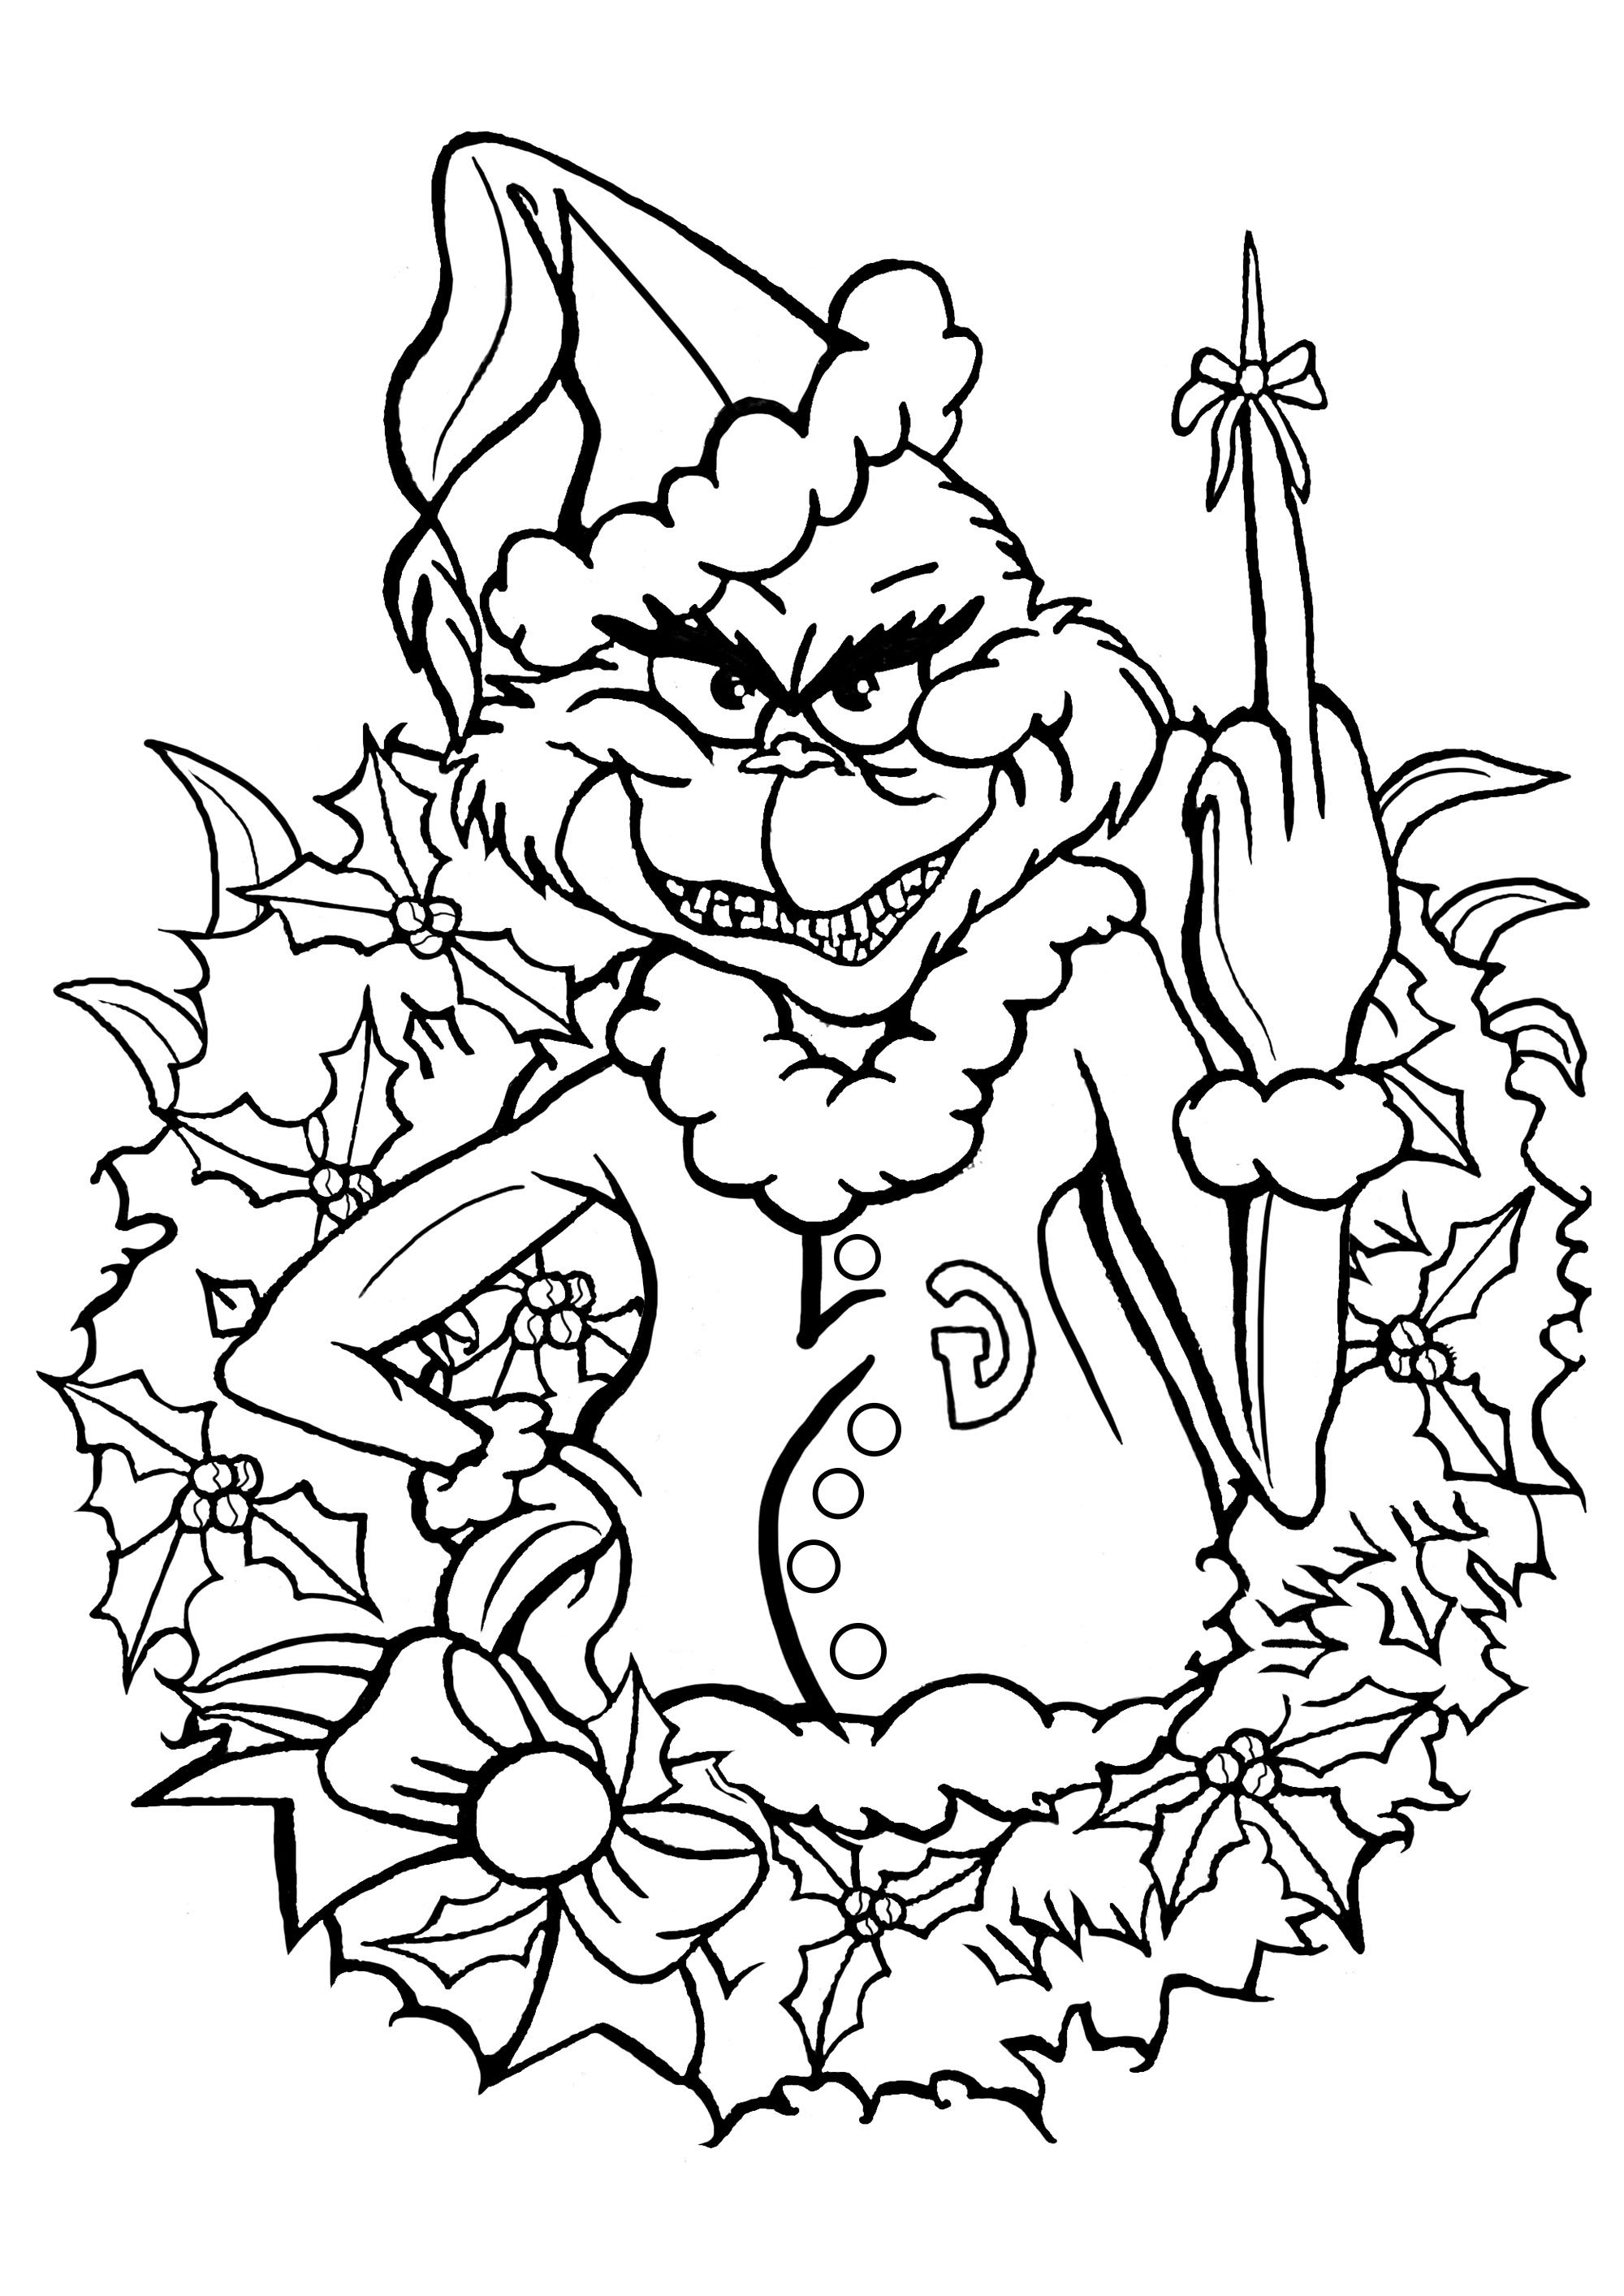 The Grinch - The Grinch Kids Coloring Pages